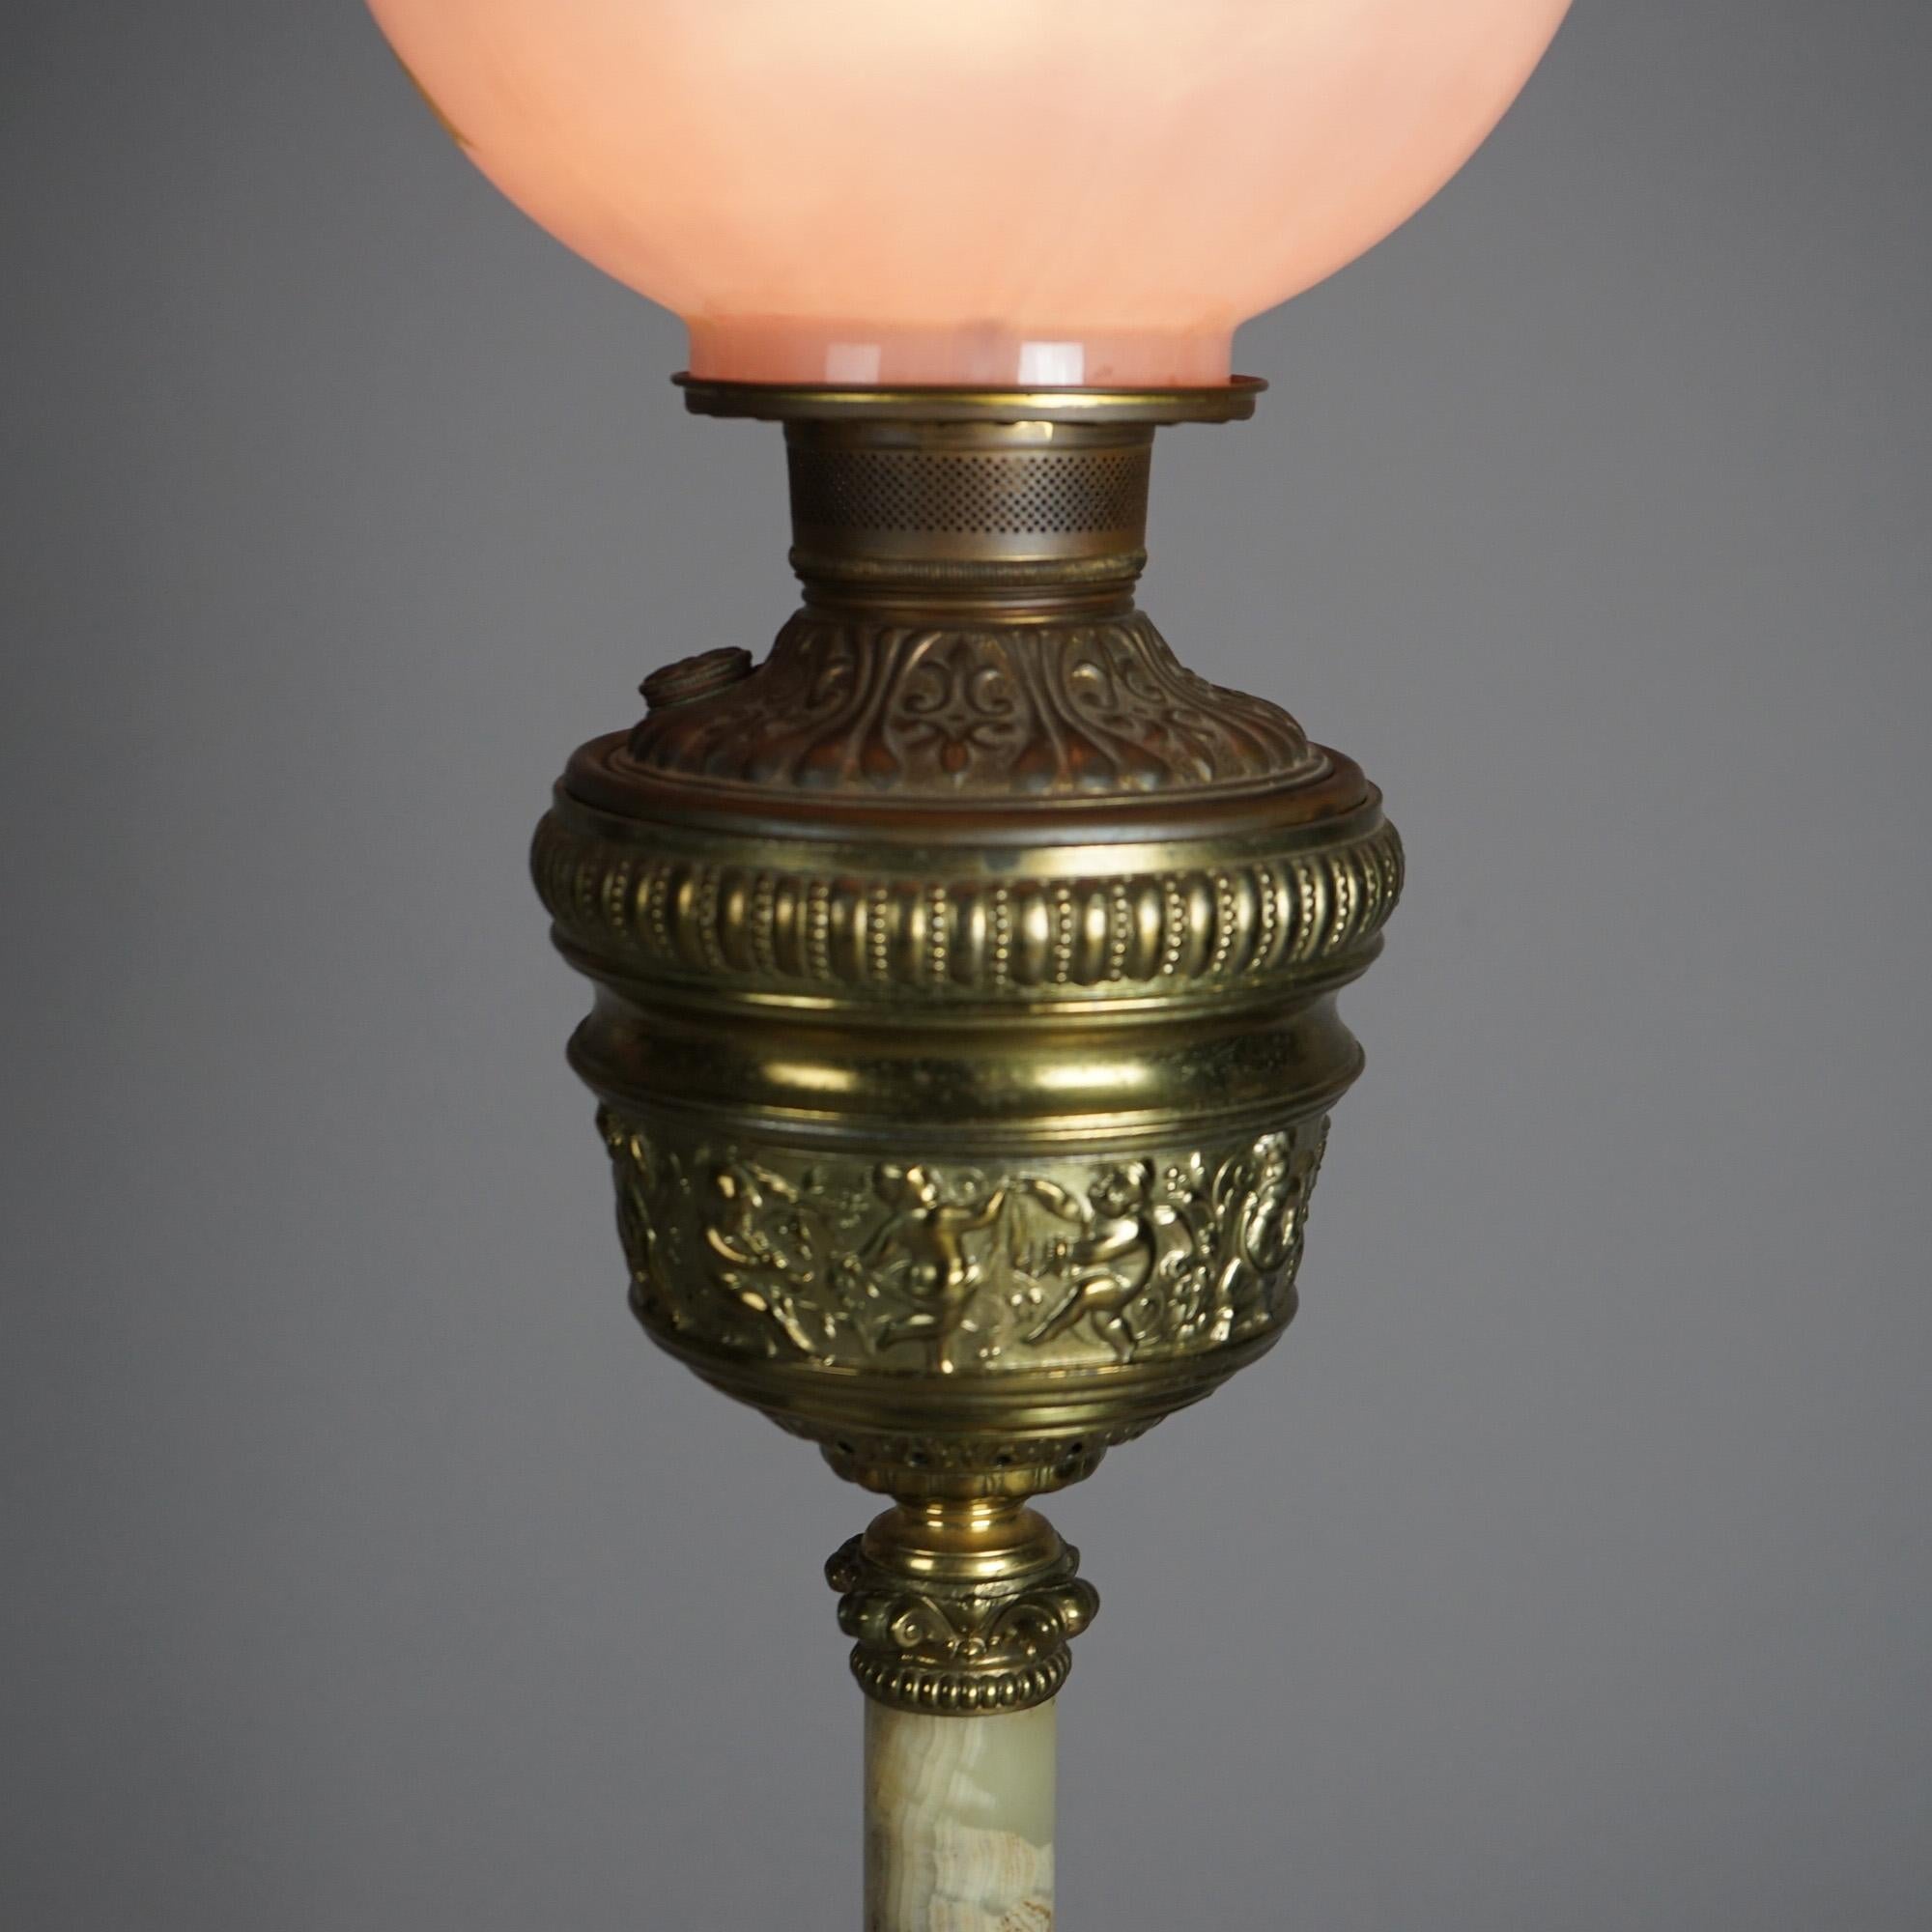 An antique Victorian parlor lamp offers hand painted floral glass shade over gilt metal base having font with embossed dancing cherubs, onyx column, and seated on footed base; electrified; c1880

Measures - 36.25